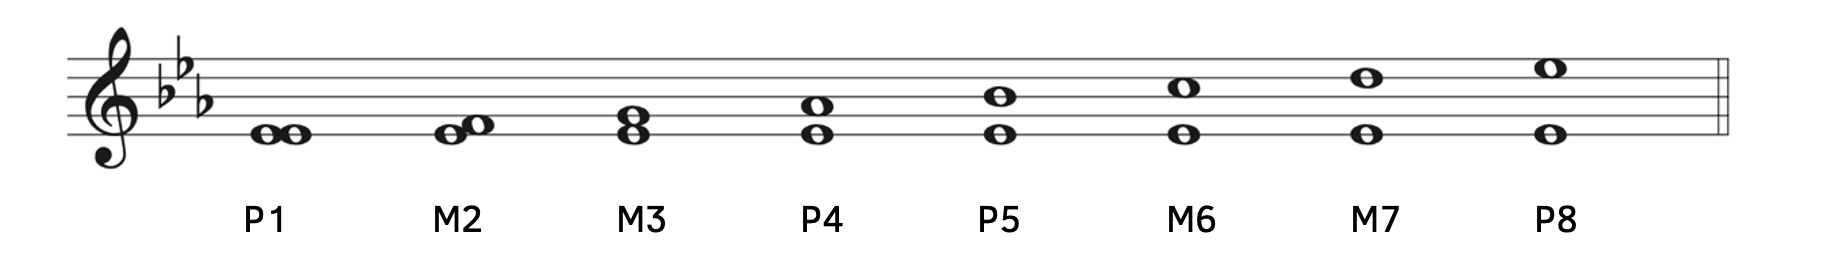 The same intervals are in the E-flat major scale as in the C major scale from Example 8.2.1.